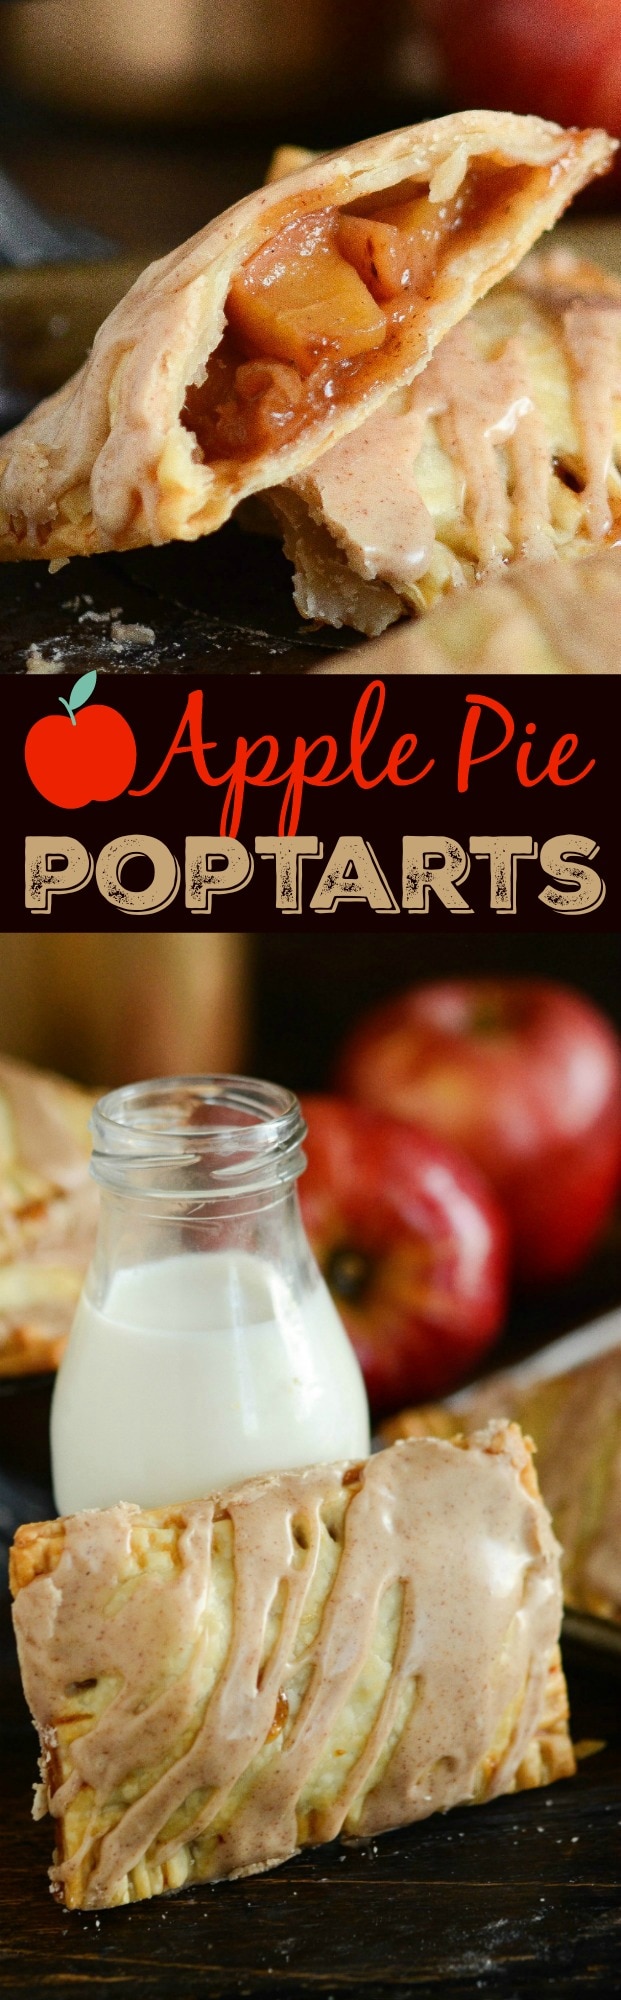 Apple Pie Poptarts: warm flaky poptarts are filled with a homemade brown sugar apple filling, baked till golden and topped with a sweet cinnamon frosting.